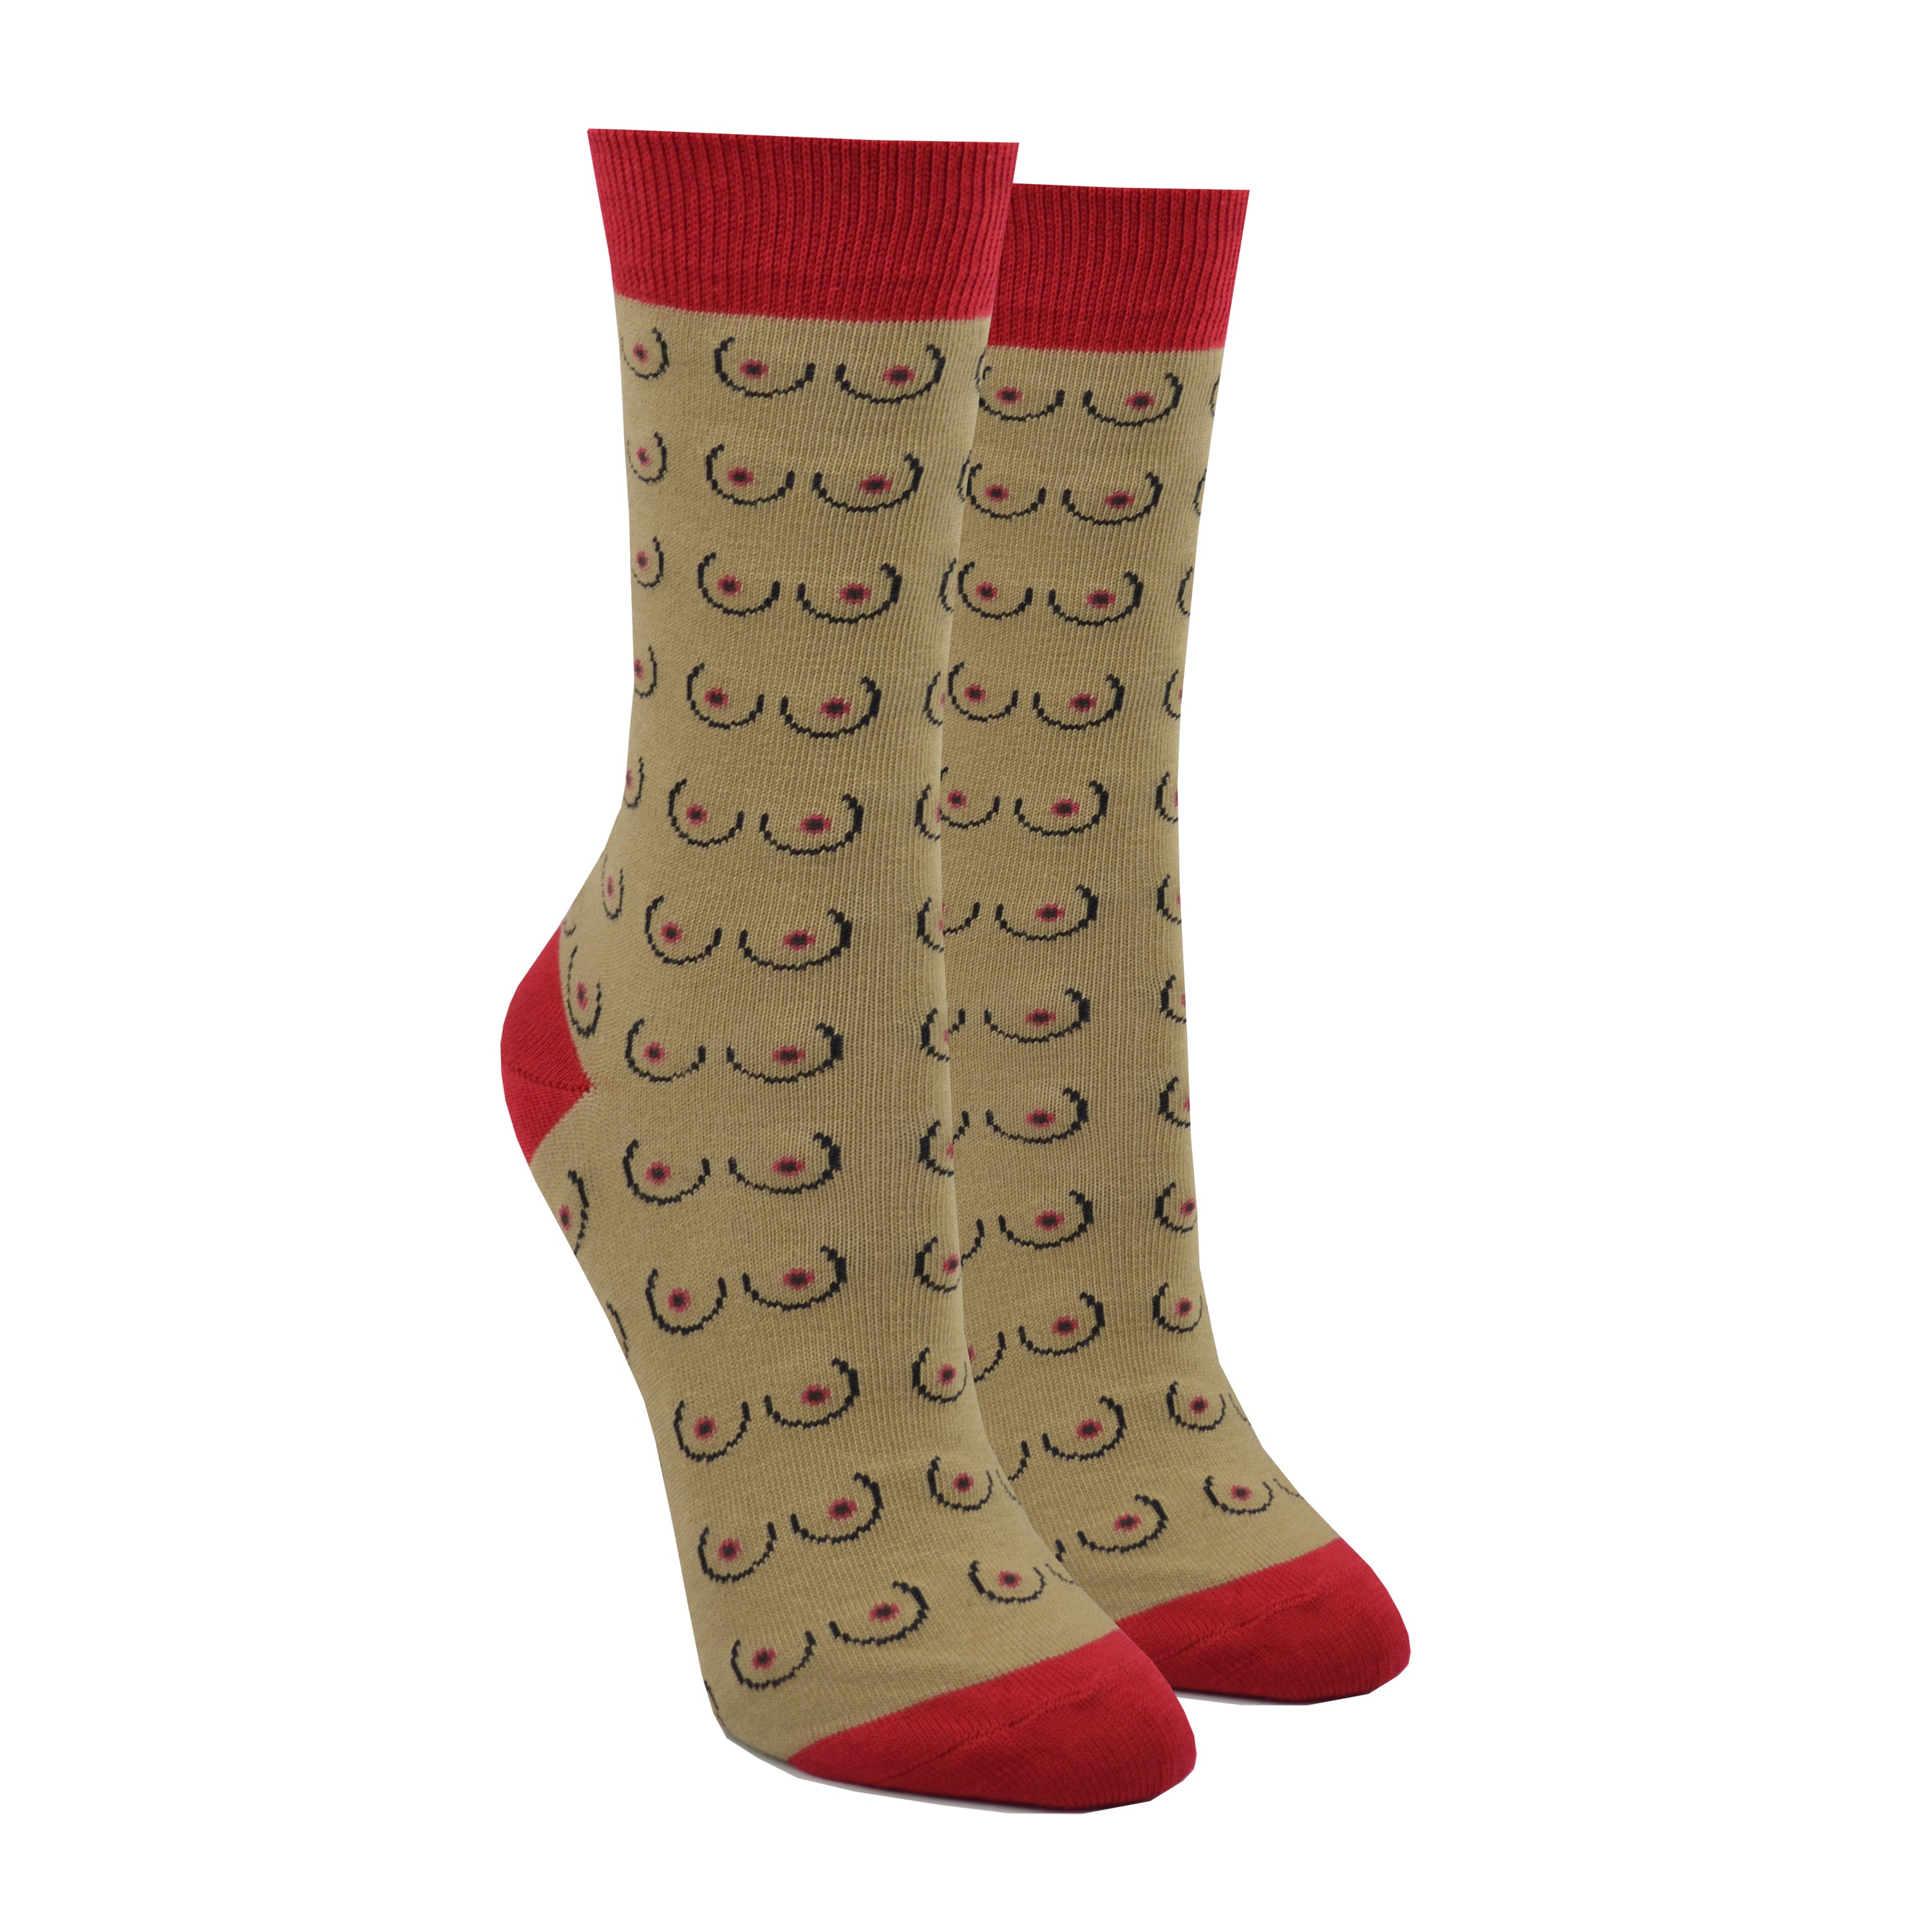 Shown on a leg form, a pair of Coucou Suzette cotton women’s crew socks with minimalistic boob pattern in dark brown skin color